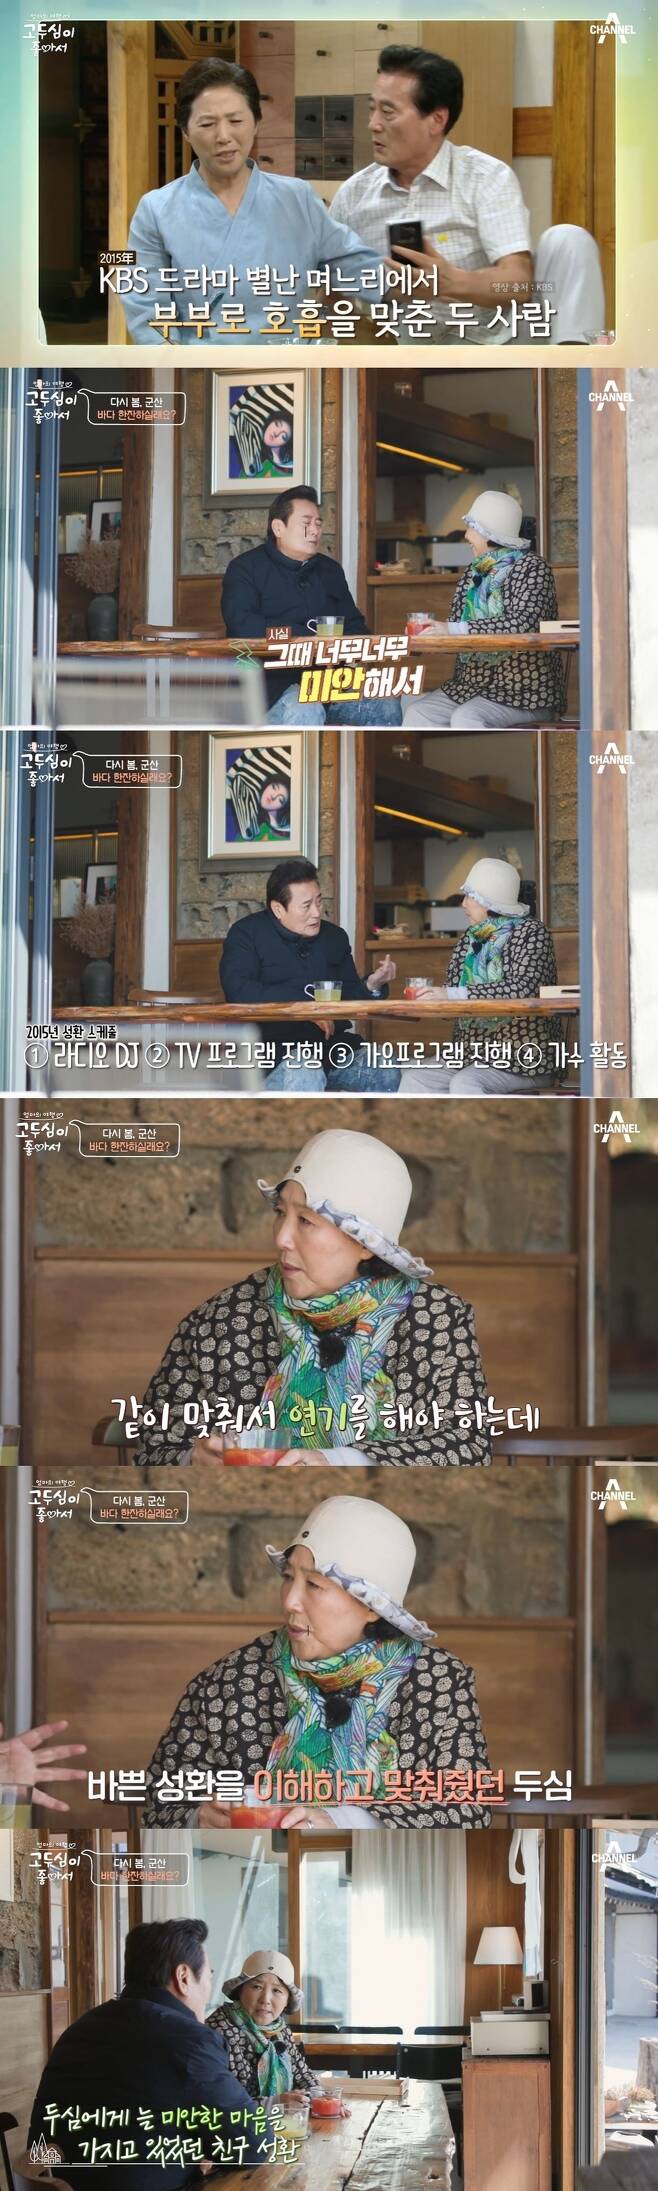 Kim Seong-hwan apologized to Go Doo-shim.Channel A broadcast on April 4  ⁇  Moms trip Go Doo-shim was drawn to Go Doo-shim who liked Gunsan.Actor and singer Kim Seong-hwan appeared as guest on this day. Go Doo-shim was a friend of the same age who met in a long time.Go Doo-shim said of Kim Seong-hwan, I am happy to meet you. I am very shy, but I am a friend who makes you happy with your conversation. He said, I will have a good date with Gunsans man.Kim Seong-hwan apologized to Go Doo-shim for recalling the memories of meeting Go Doo-shim with his wife in the drama  ⁇  Weird daughter-in-law  ⁇  in 2015.Kim Seong-hwan said, I was so sorry at the time. At that time, when I was going to be a radio DJ, hosting a program, and even performing as a singer, I had to set it up in advance and postpone it, but I couldnt. I was thinking that I should repay the favor sometime.